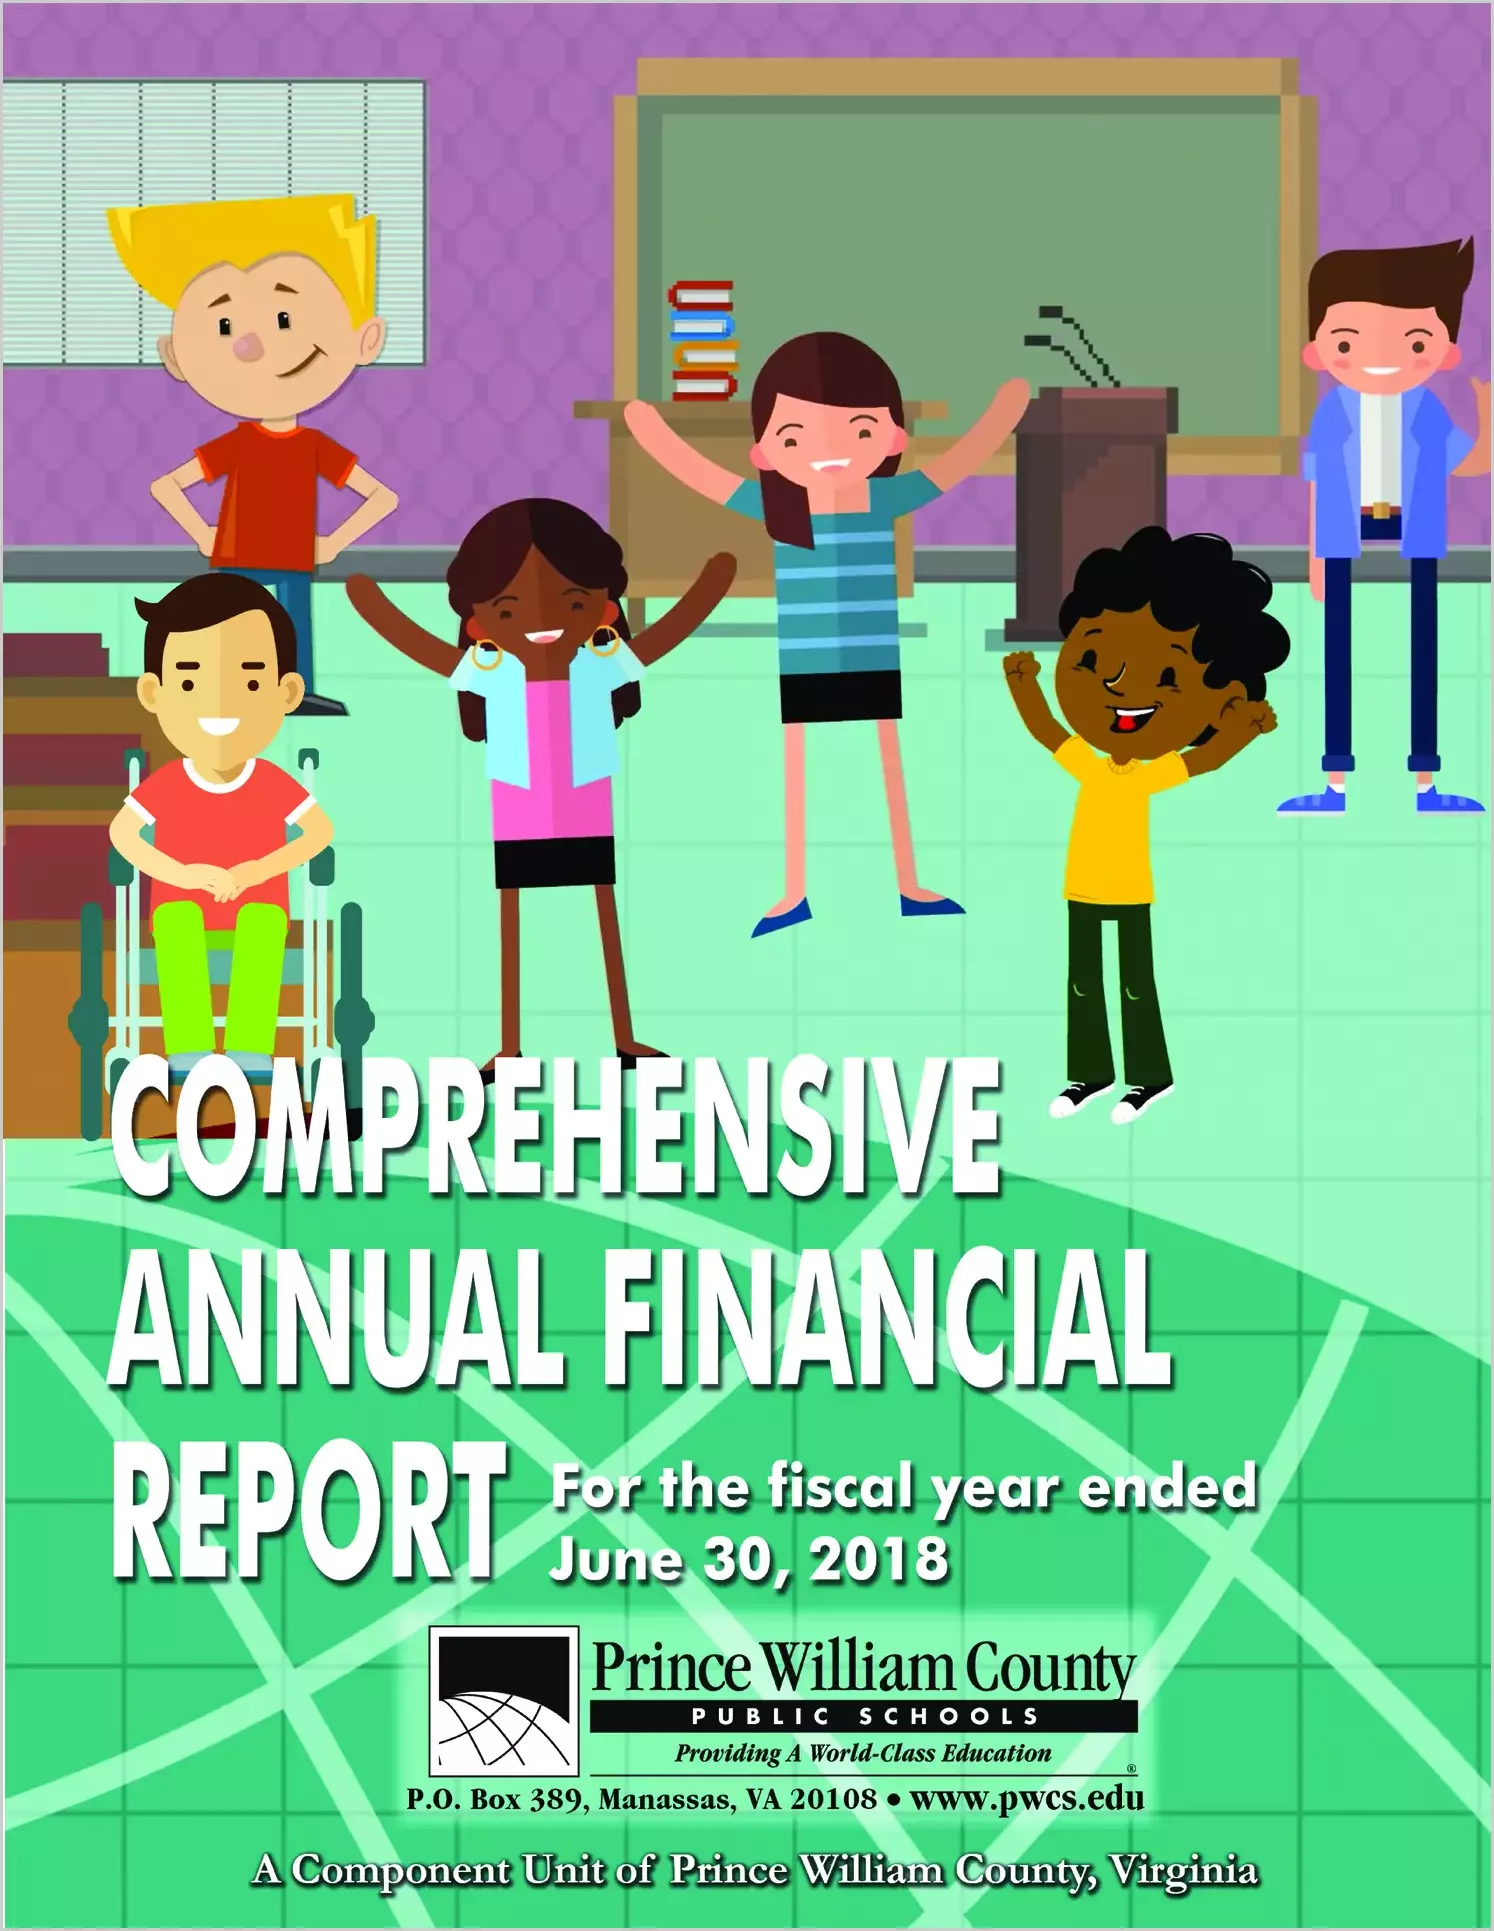 2018 Public Schools Annual Financial Report for County of Prince William